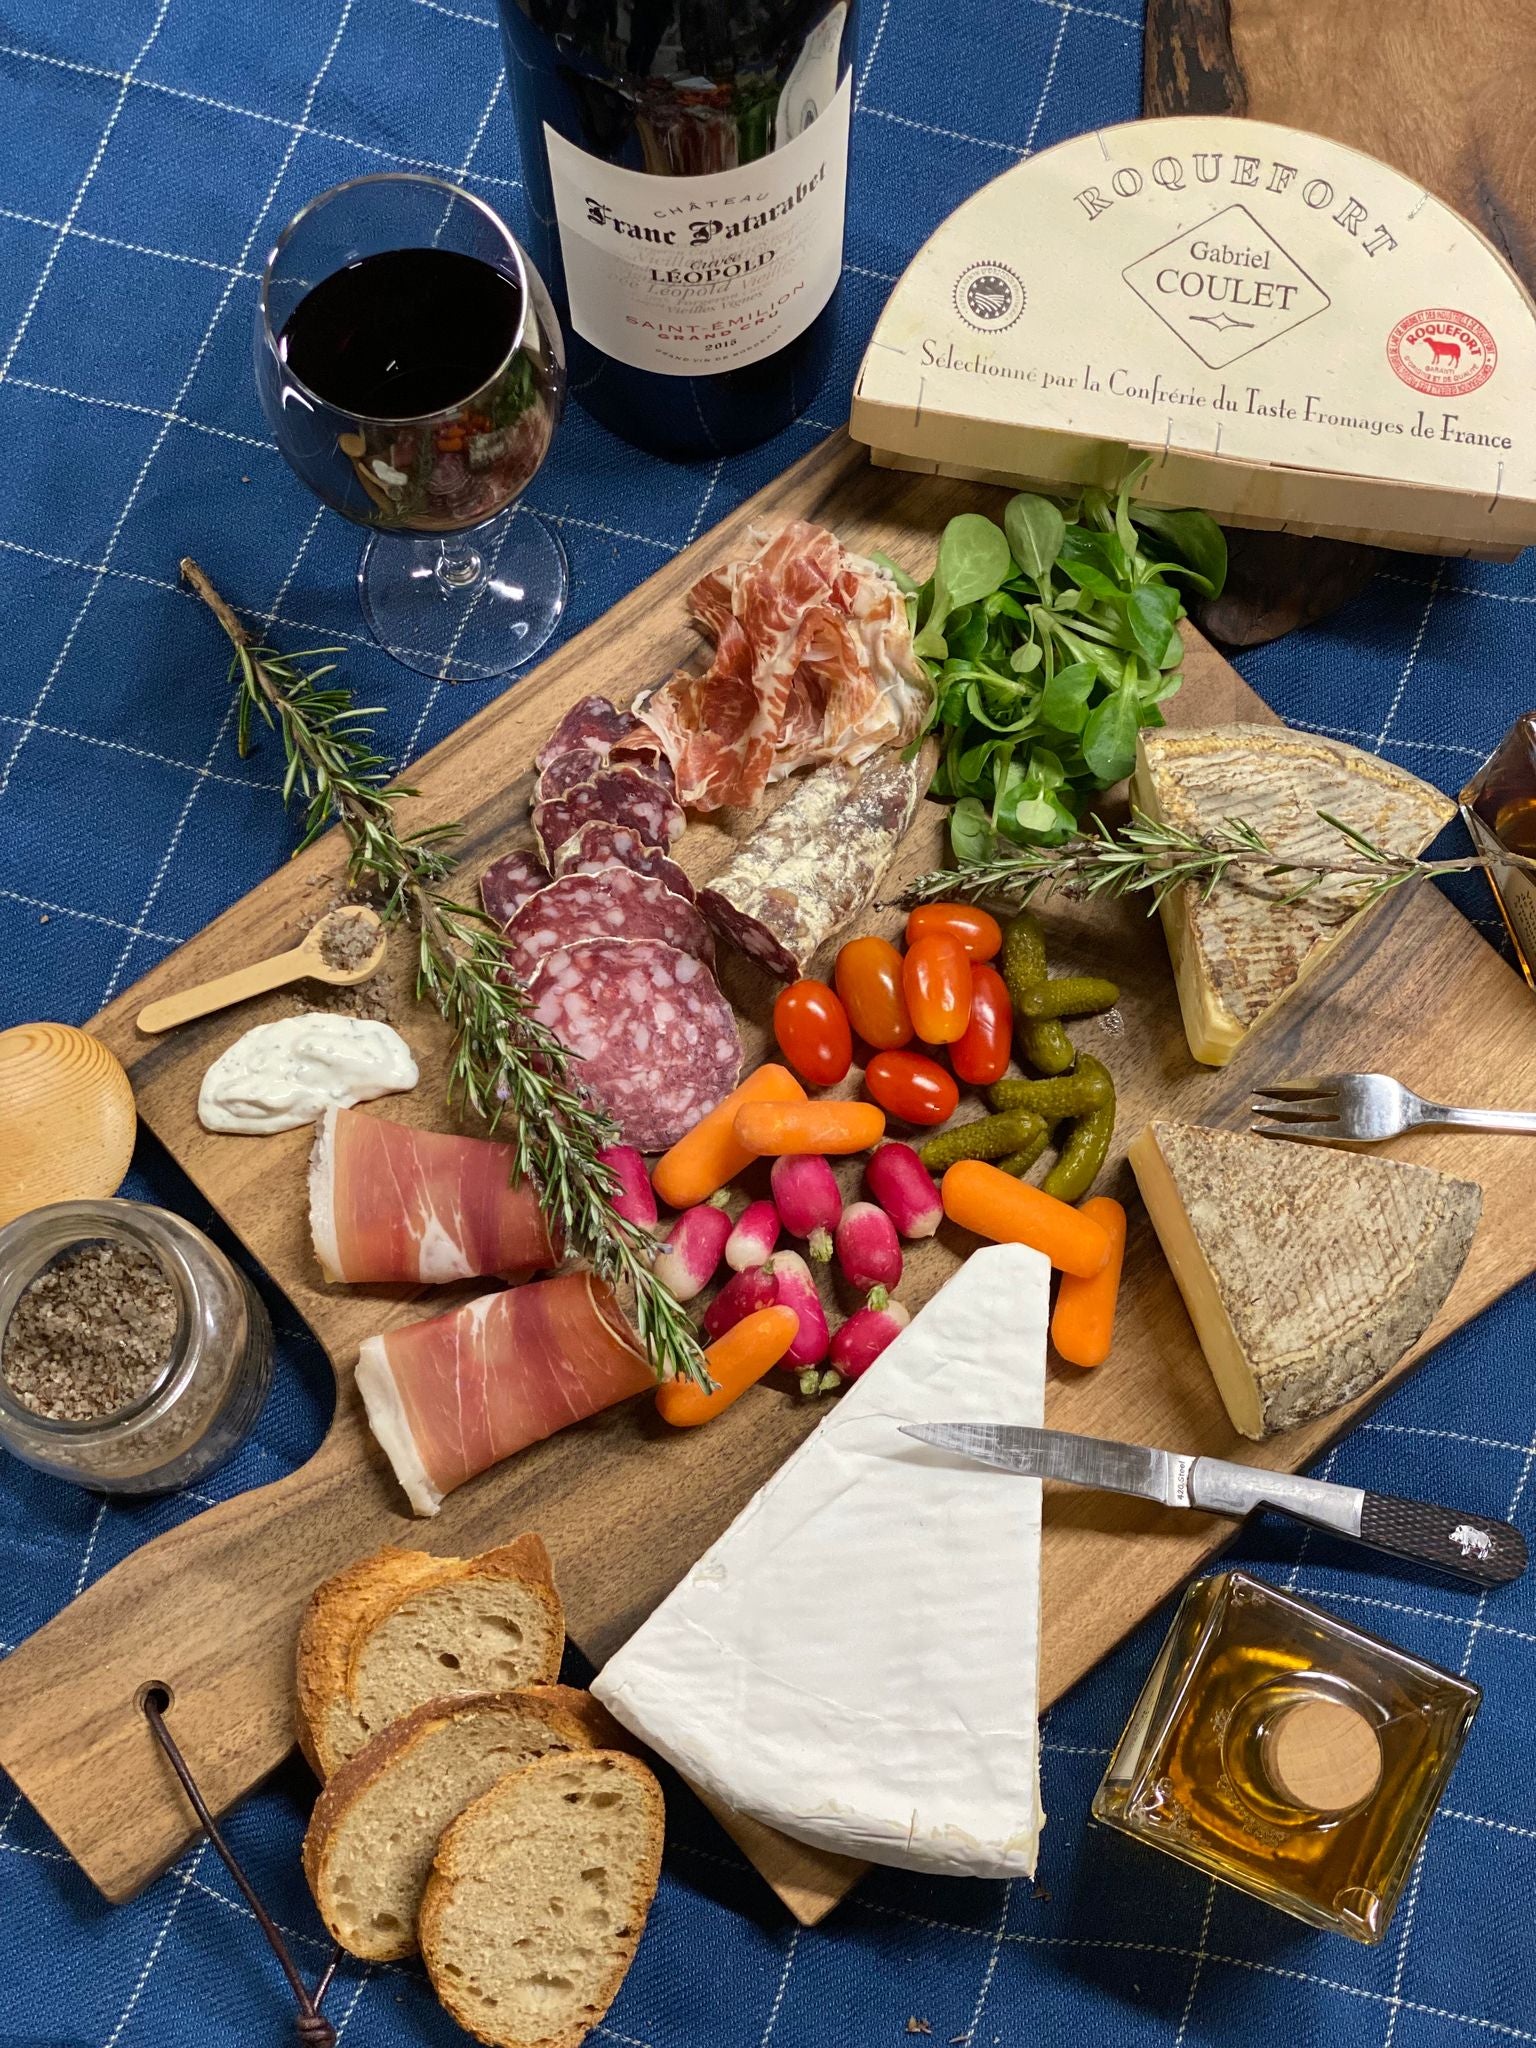 Walnut serving board with charcuterie on top next to glass of wine.